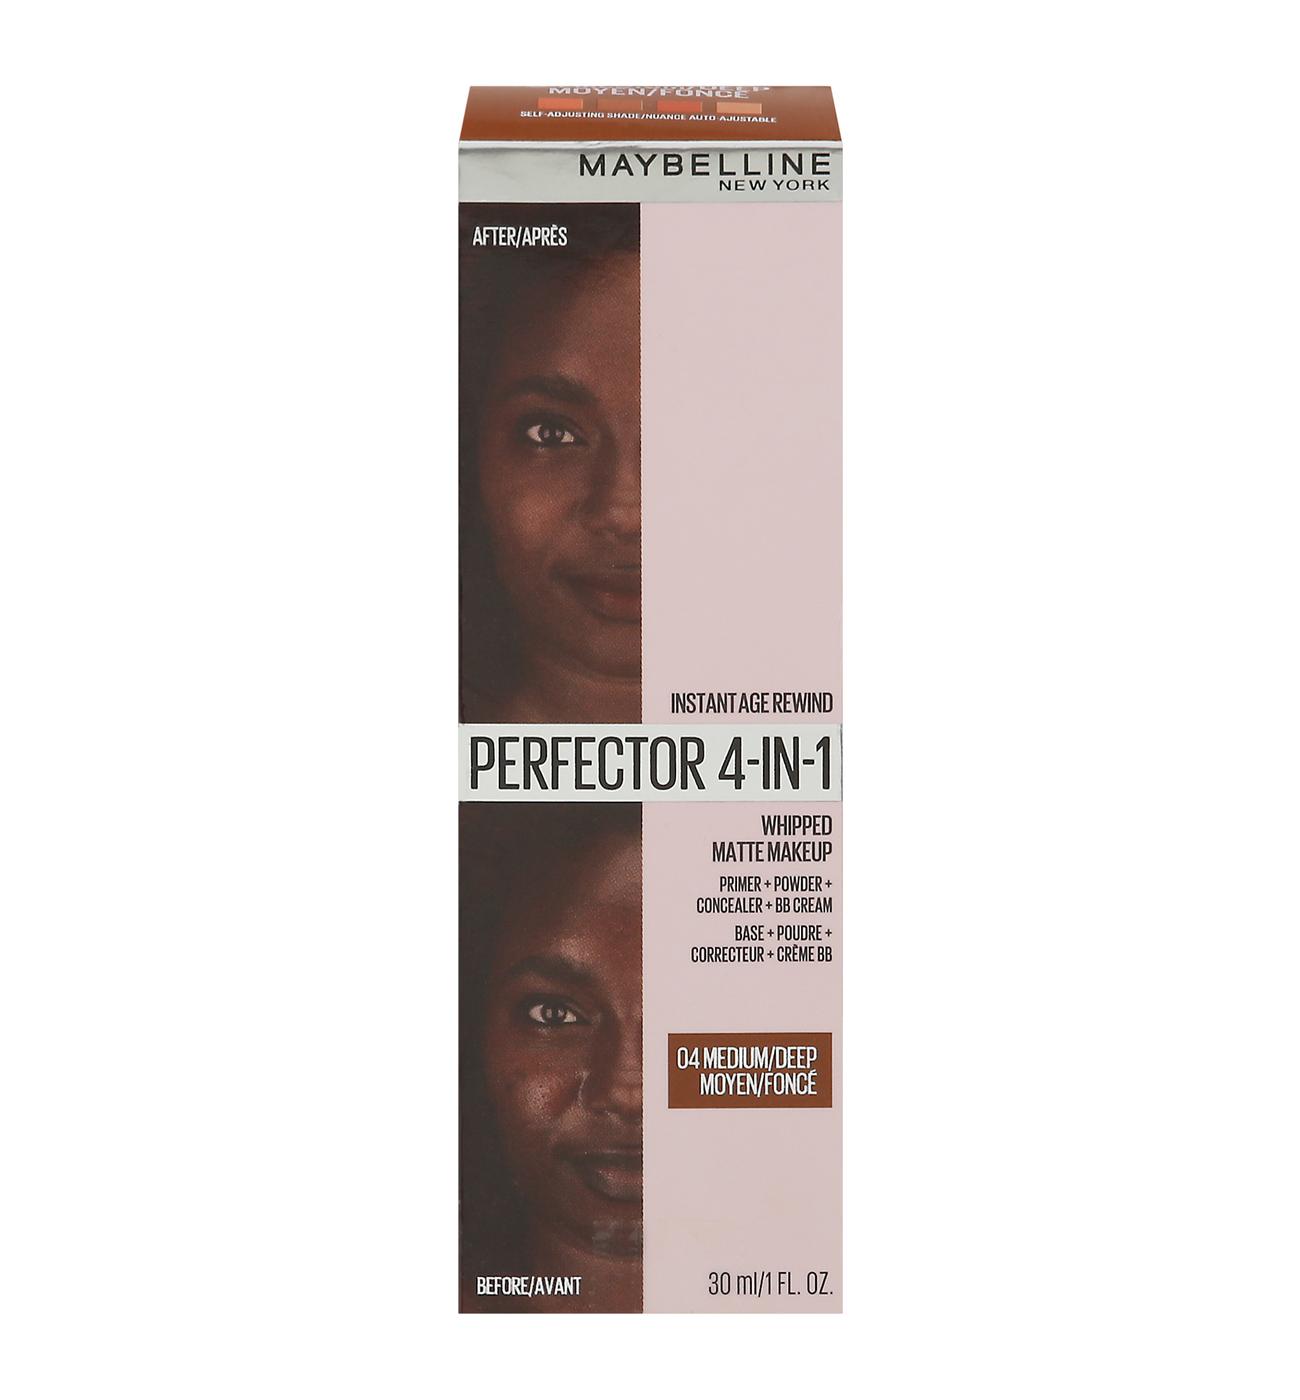 Makeup Rewind Maybelline Perfector 04 4-In-1 - Instant H-E-B Foundation Age - Matte Medium/Deep at Shop